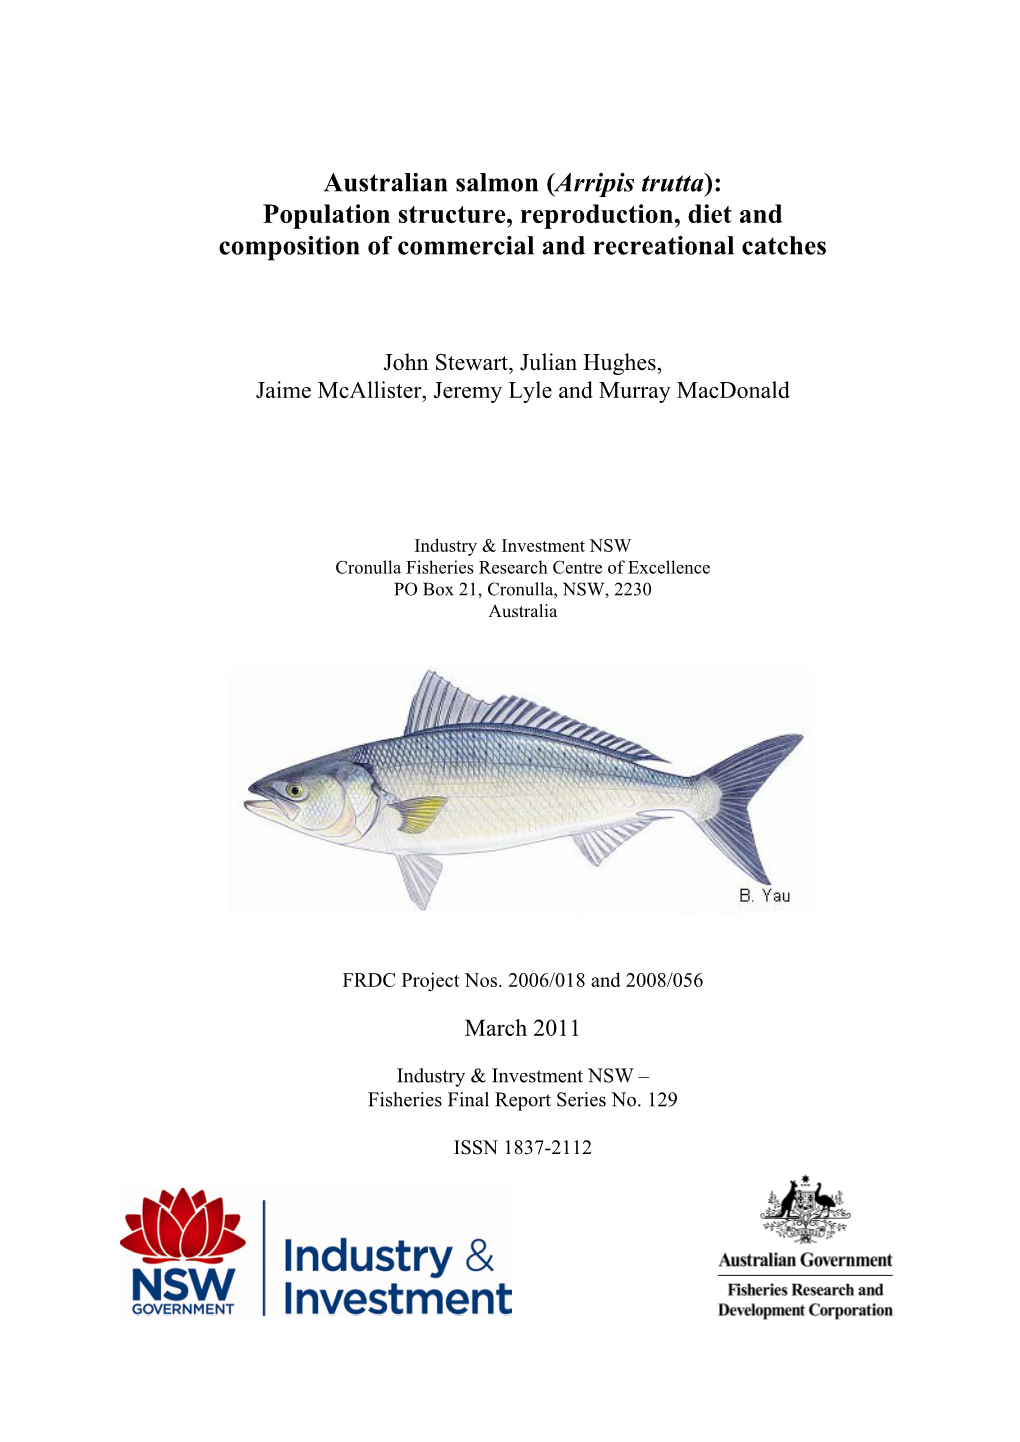 Arripis Trutta): Population Structure, Reproduction, Diet and Composition of Commercial and Recreational Catches